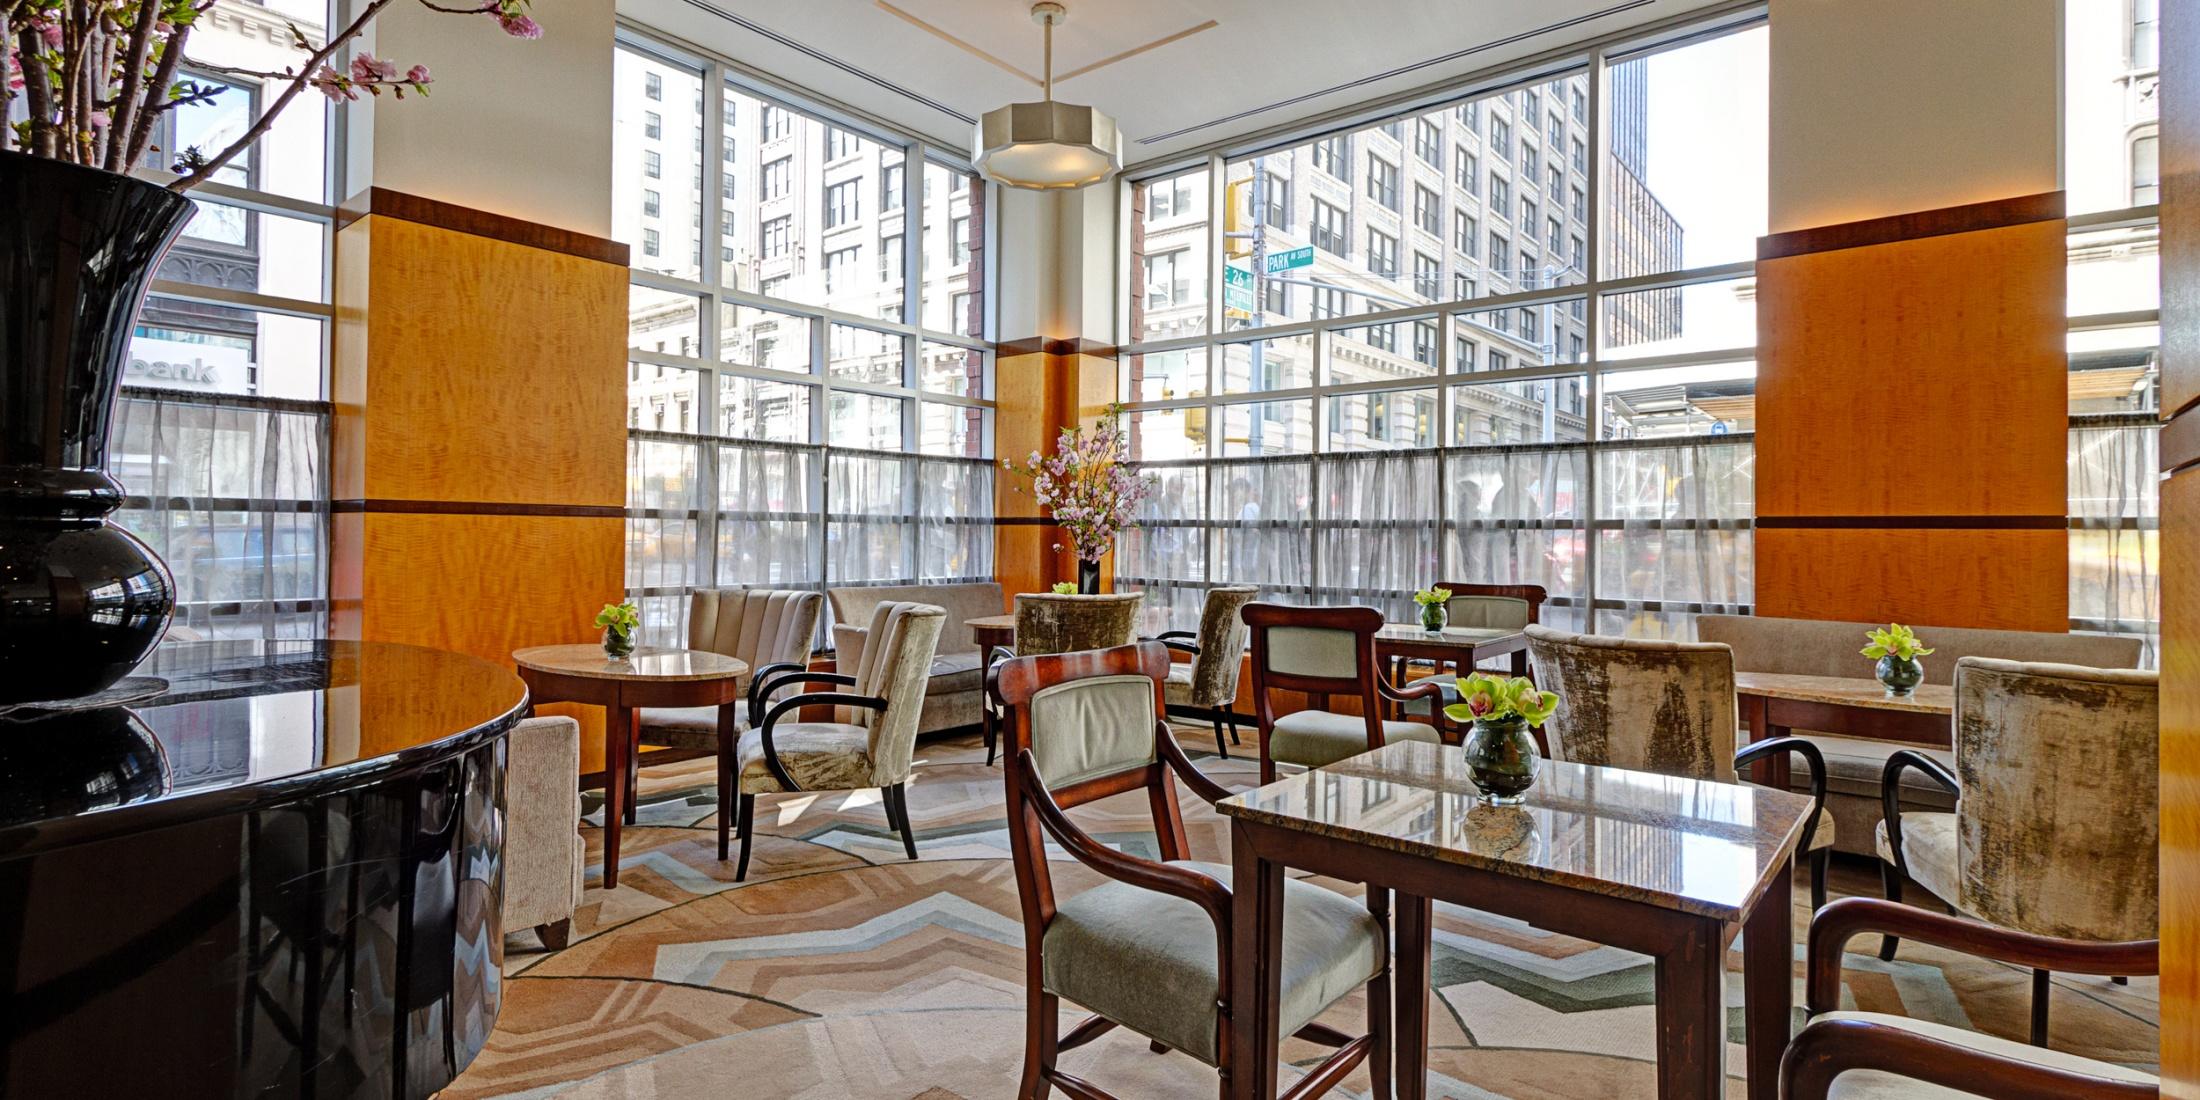 Hotel Giraffe's grand lobby is the place for guests to gather anytime for complimentary refreshments including Continental Breakfast each morning and a 3-hour wine and cheese reception each evening.